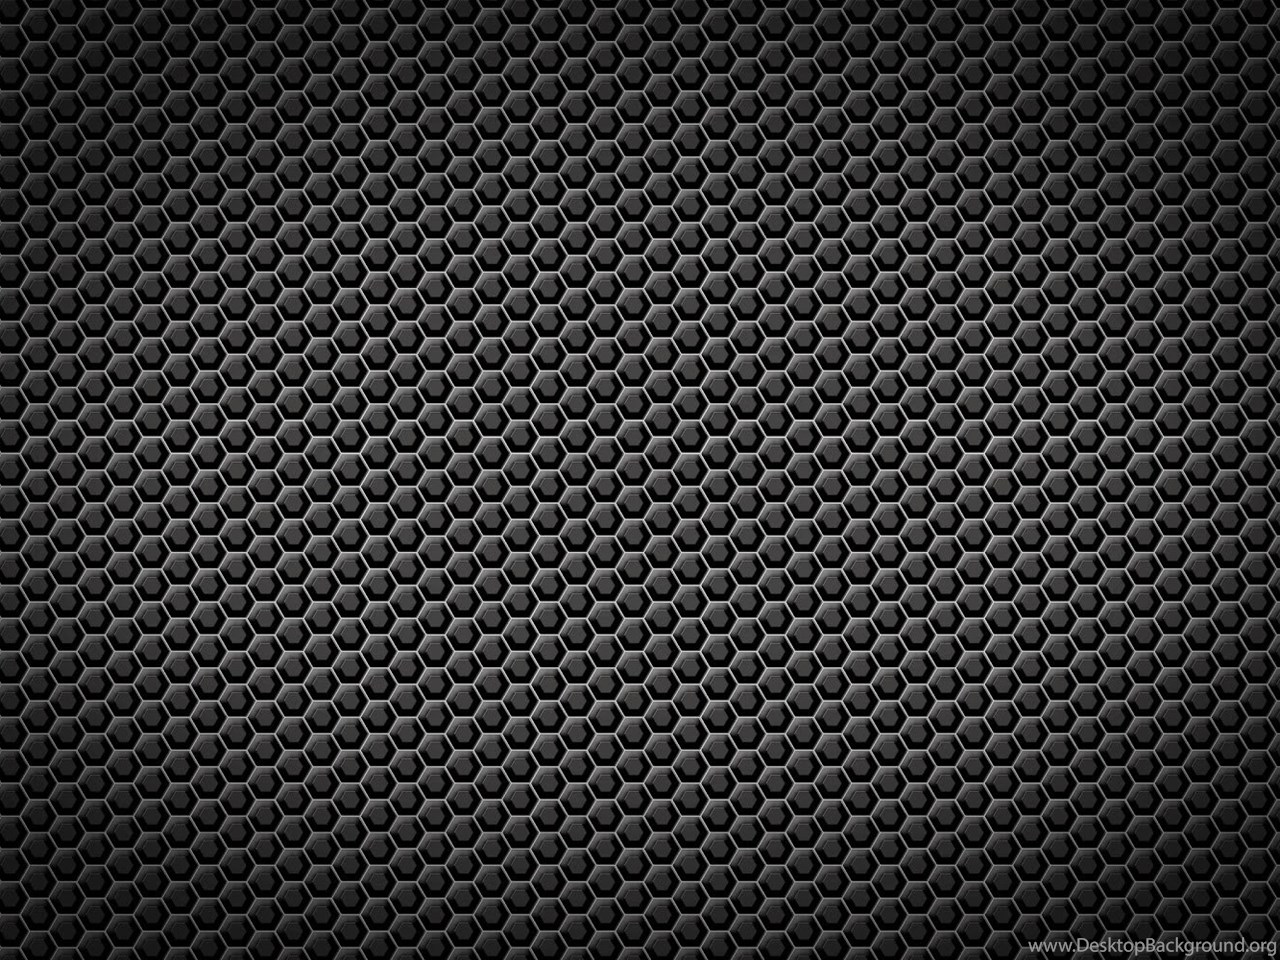 Top 30 High Quality Free Photoshop Patterns And Textures ... Desktop ...